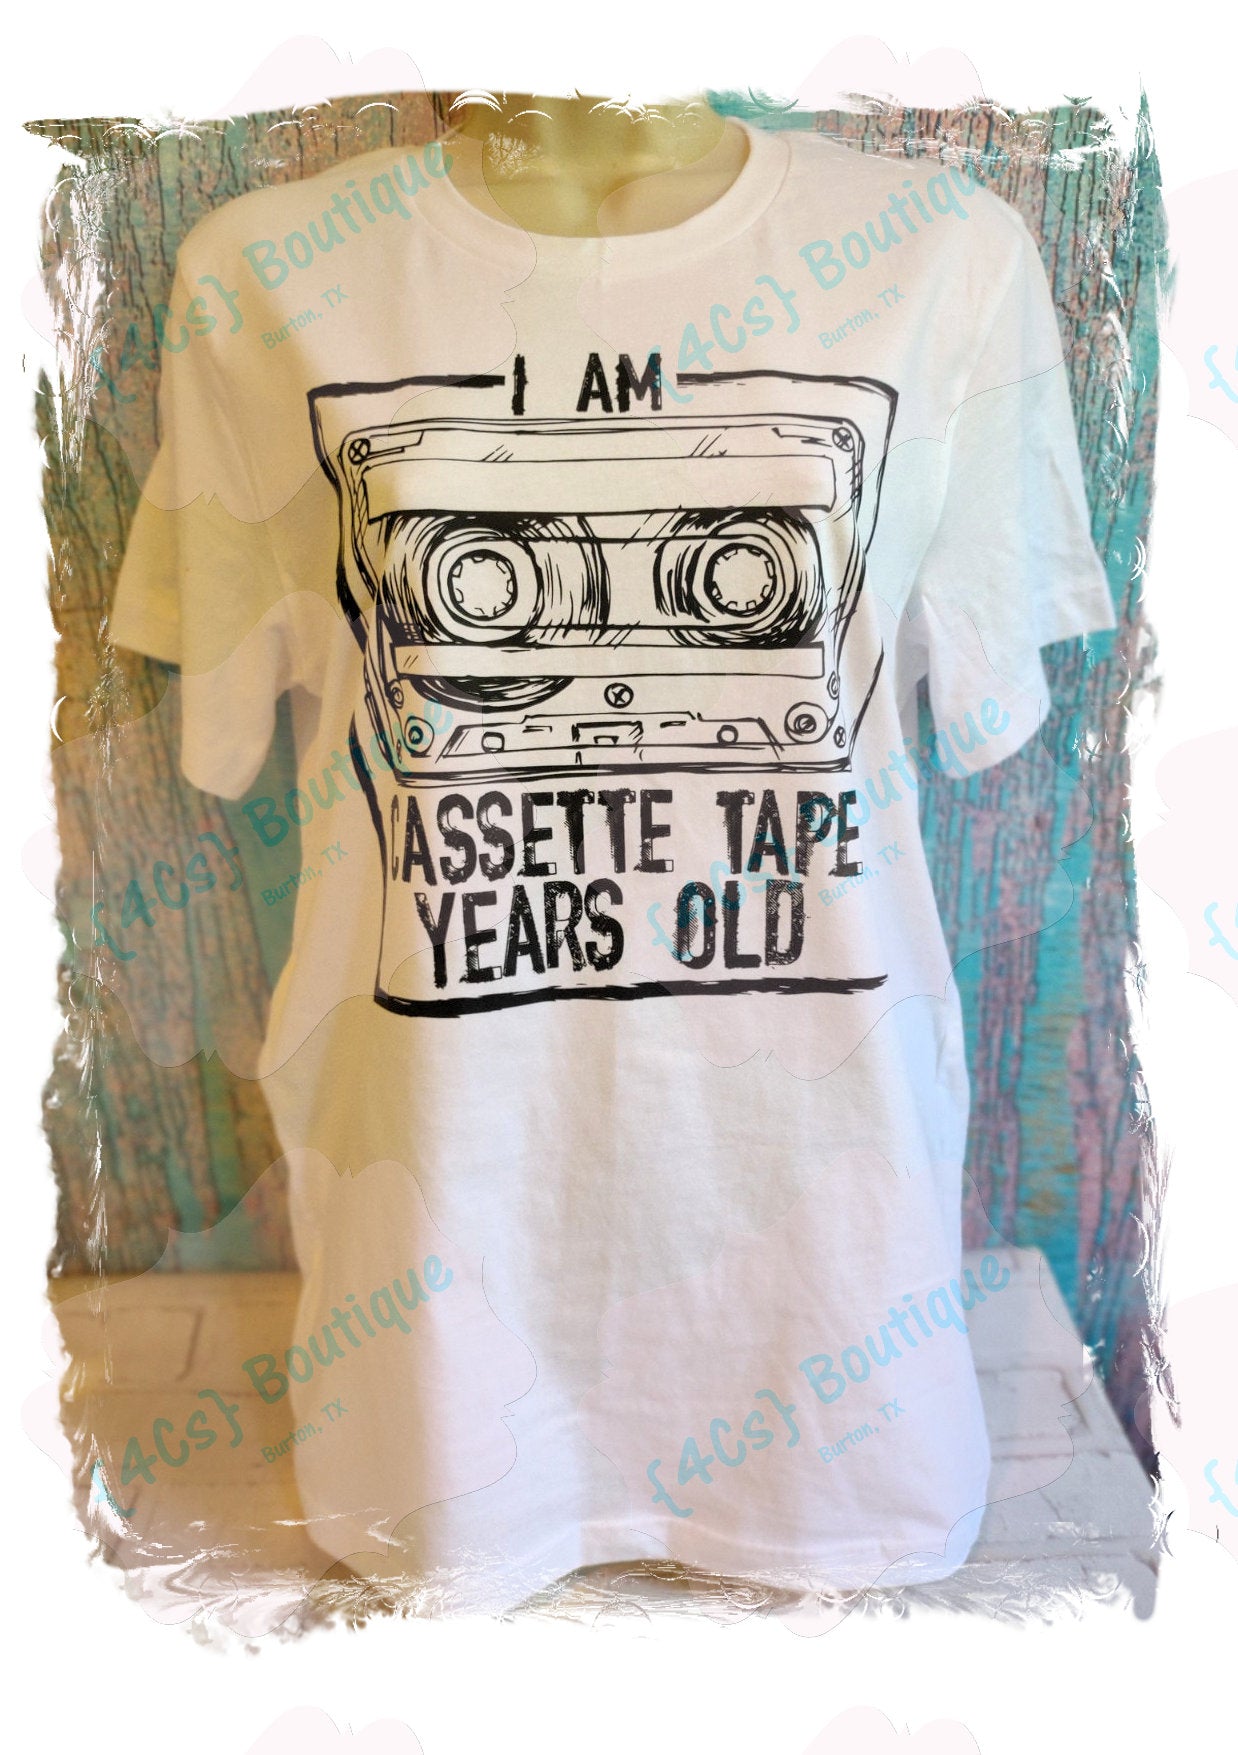 I Am Cassette Tape Years Old Shirt